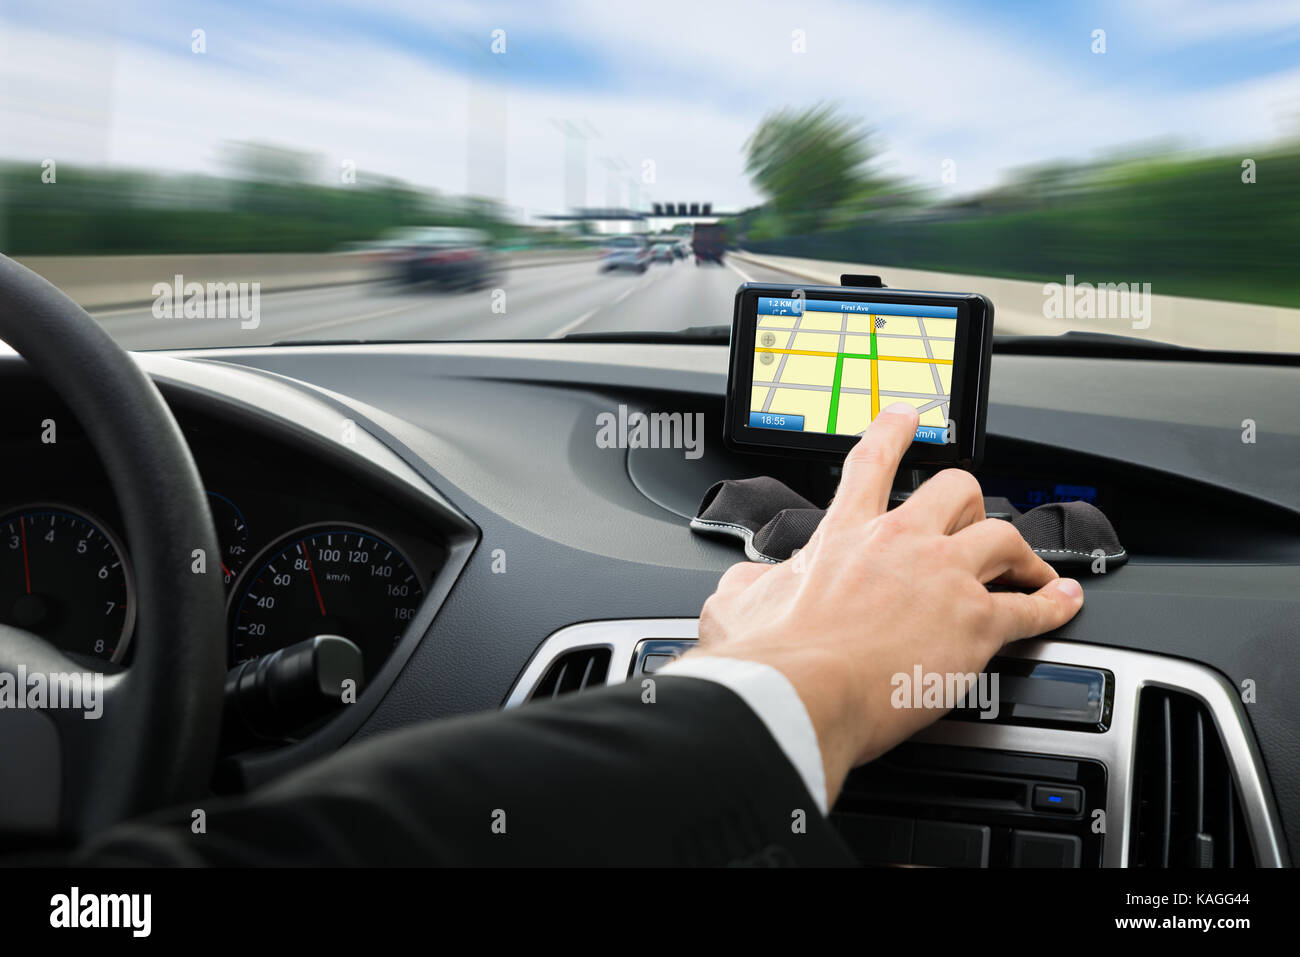 Close-up Of A Person's Hand Using Gps Navigation System In Car Stock Photo